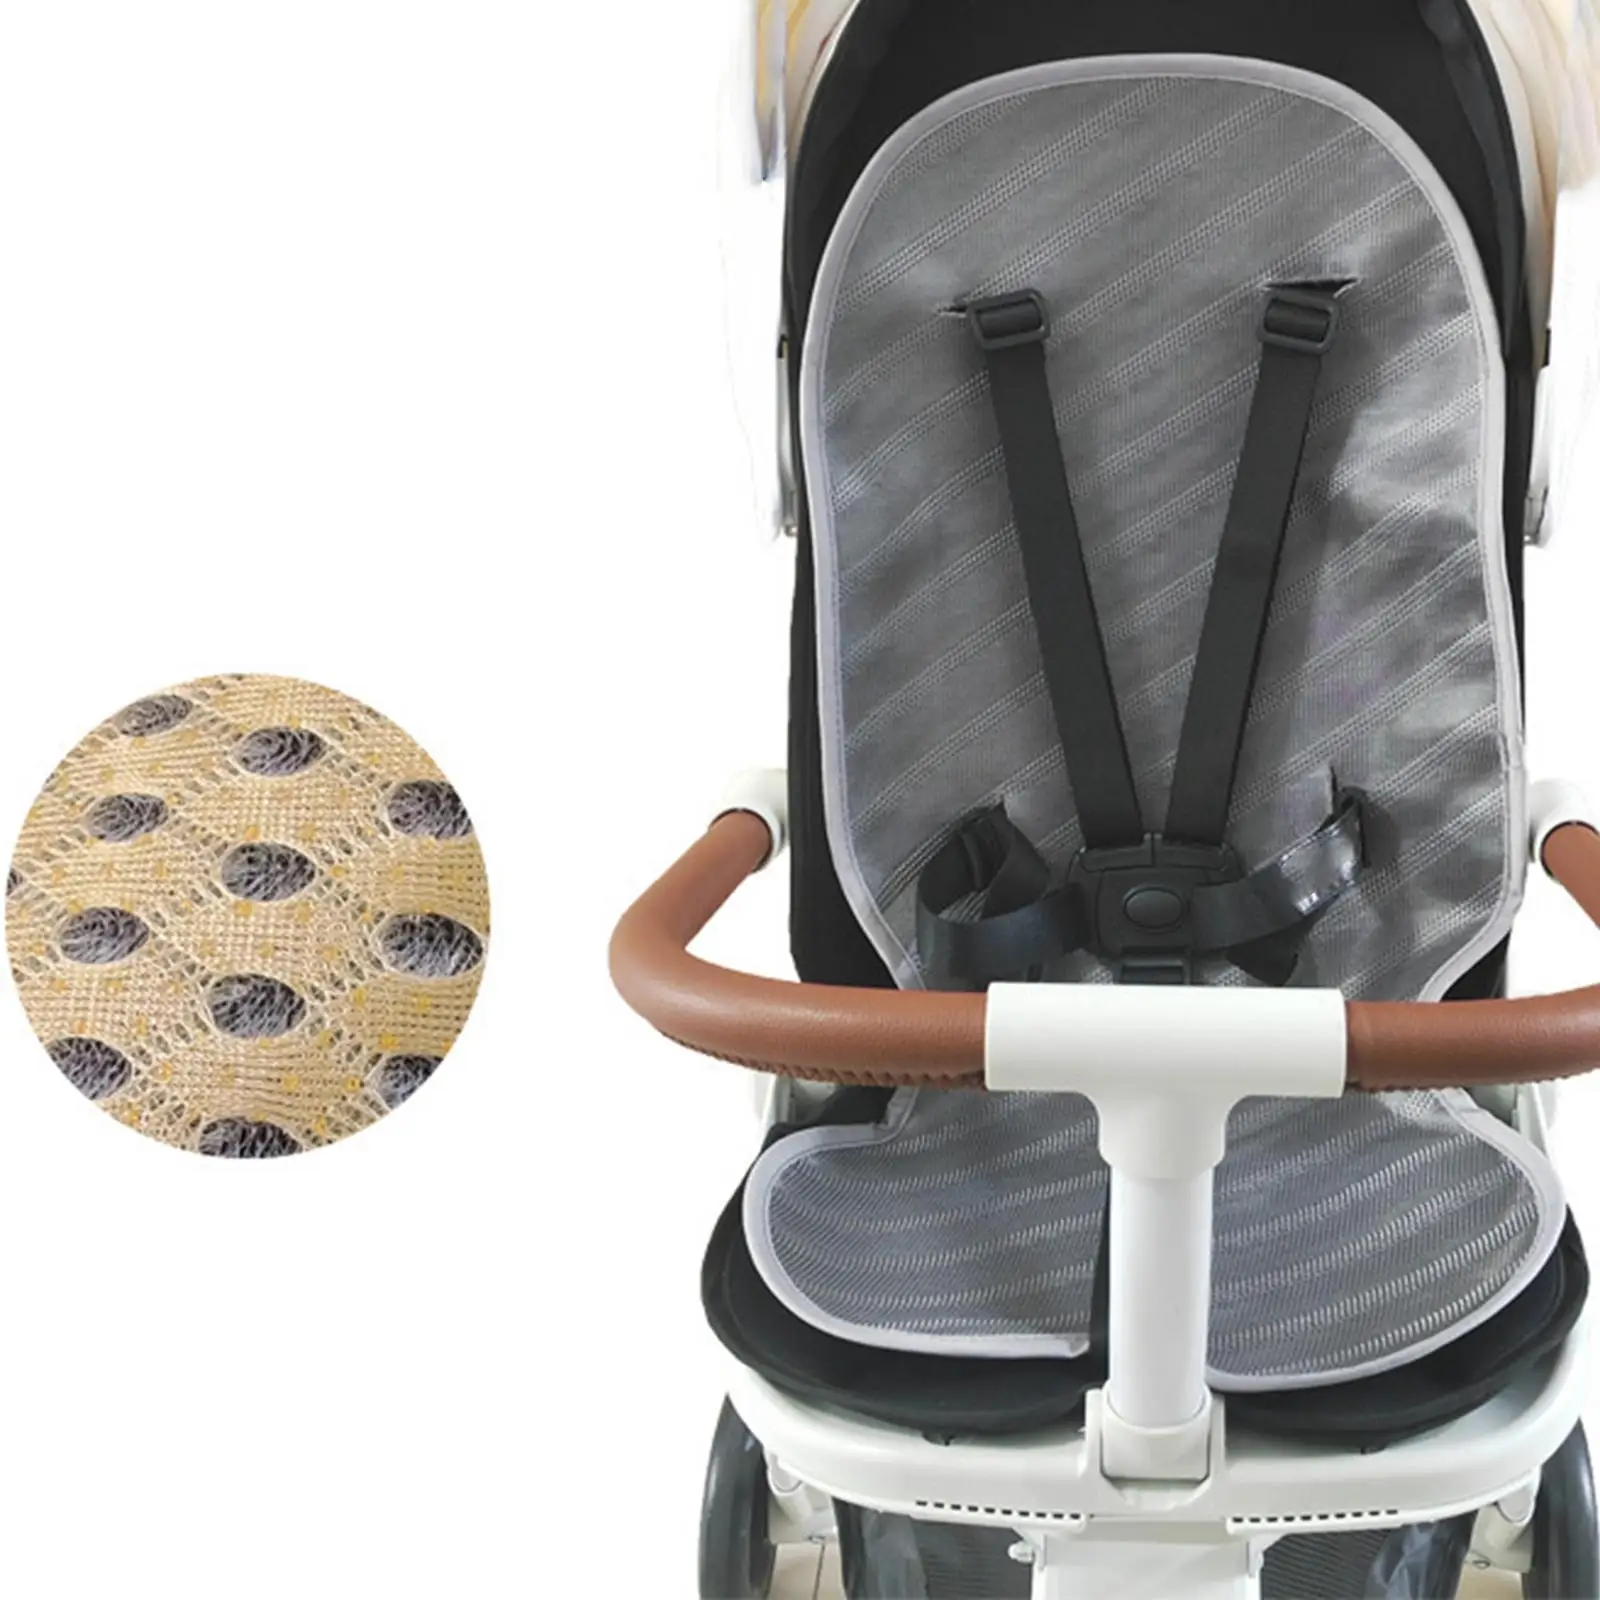 Pushchair Seat Cooling Mat Cool Seat Pad Mat Comfortable Summer Cooling Seat Pad for Baby Dining Chair Pushchair Strollers Pram